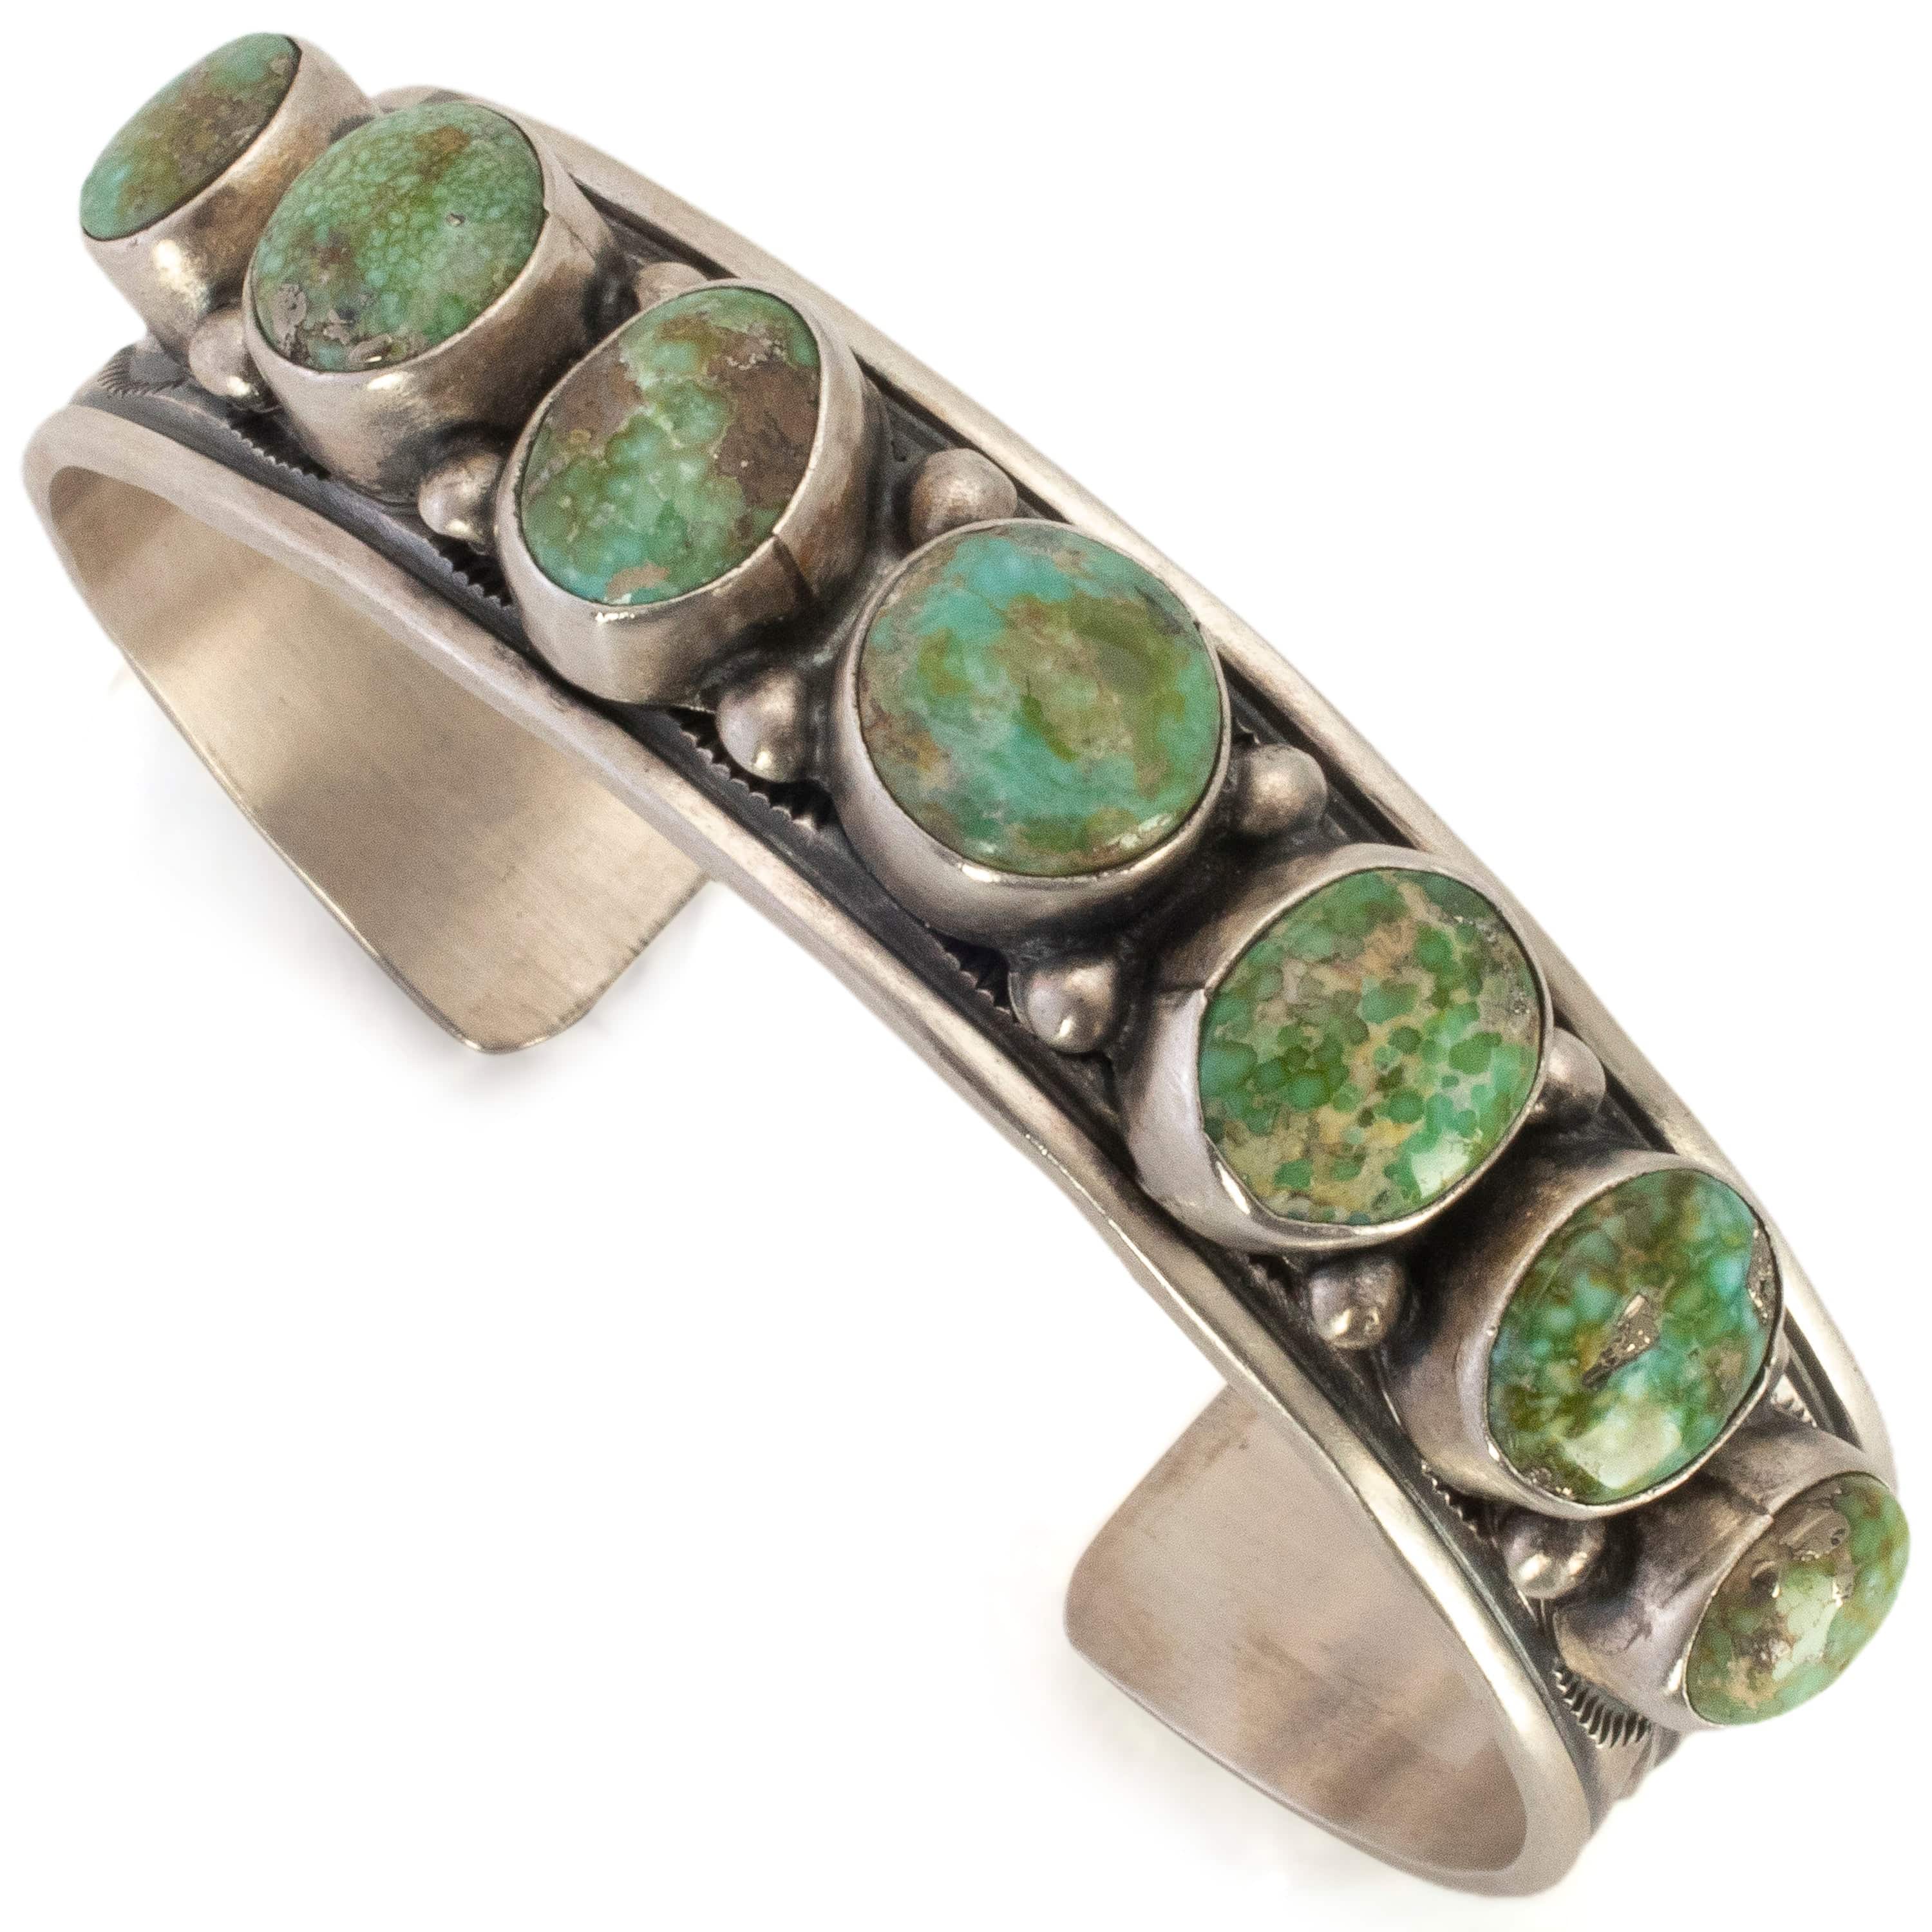 Kalifano Native American Jewelry Darrin Livingston Navajo Sonoran Gold Turquoise USA Native American Made 925 Sterling Silver Cuff NAB2400.013